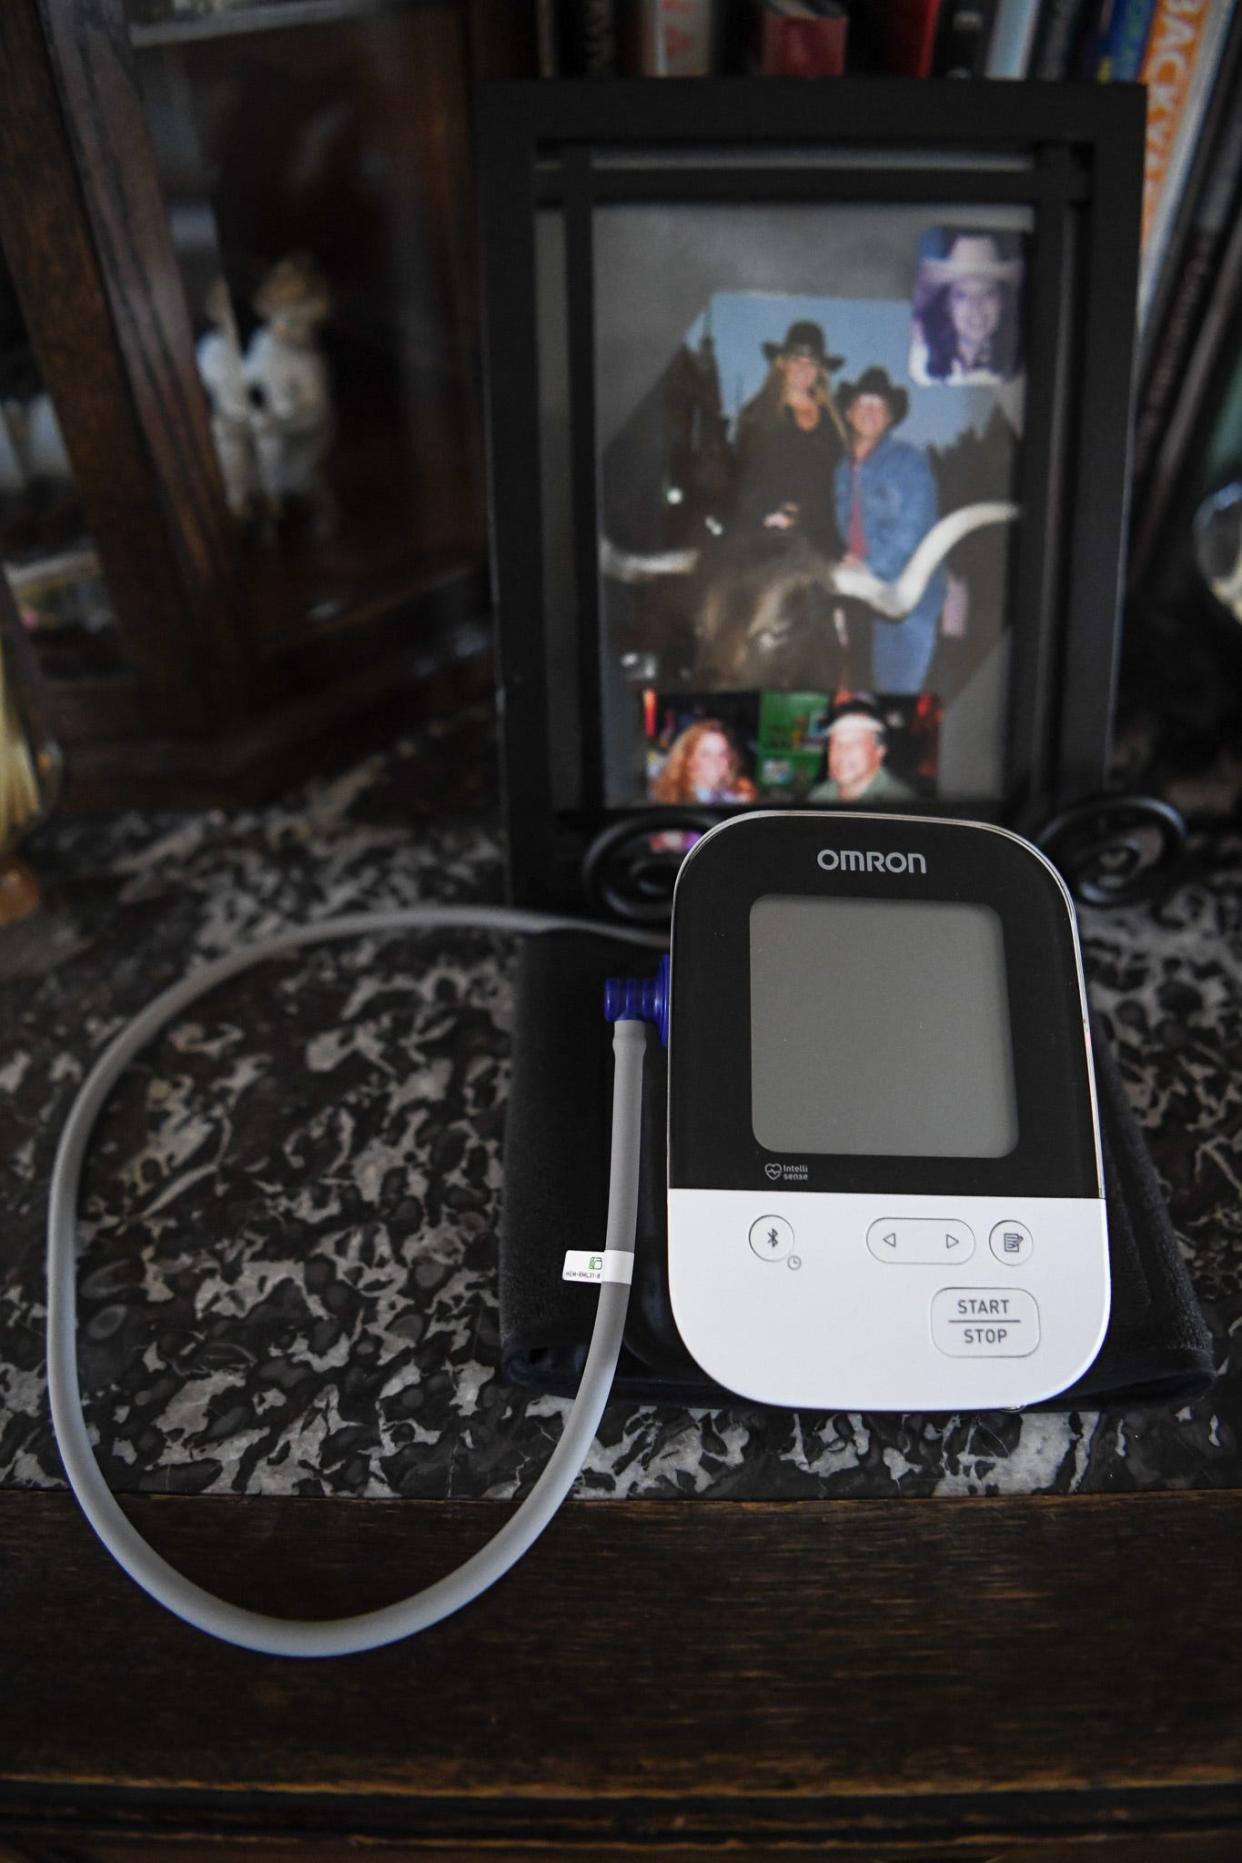 Sandy Edlein's blood pressure monitor sits at the ready alongside family photographs.